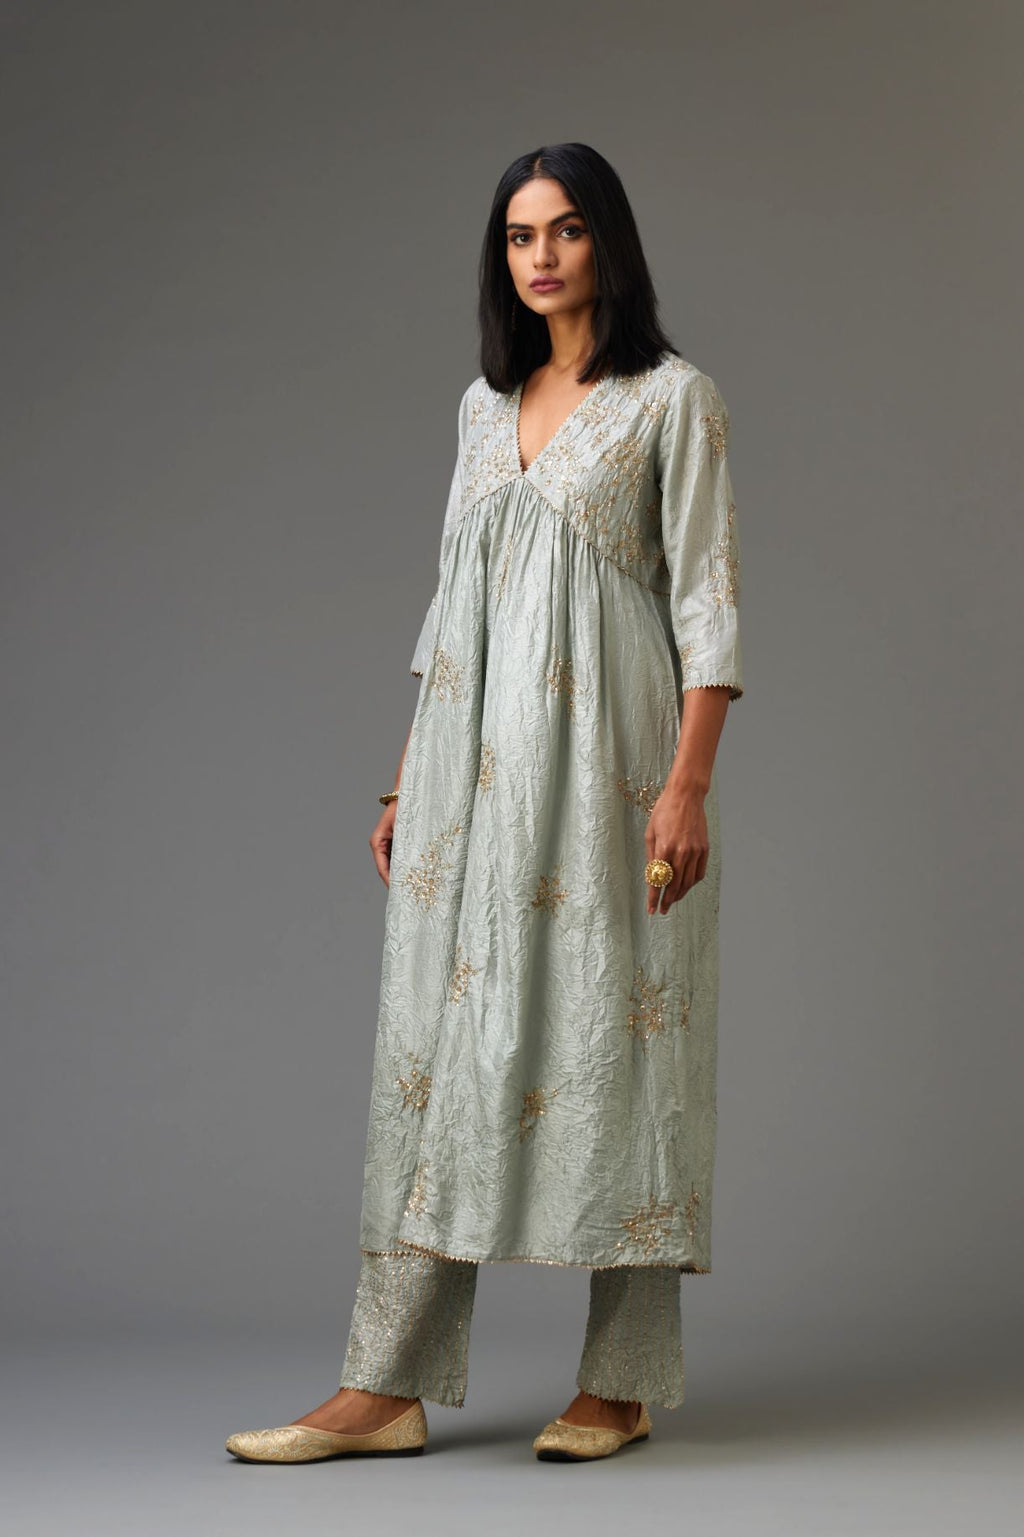 Blue silk hand crushed V neck gathered kurta, highlighted with all-over gold sequins boota.